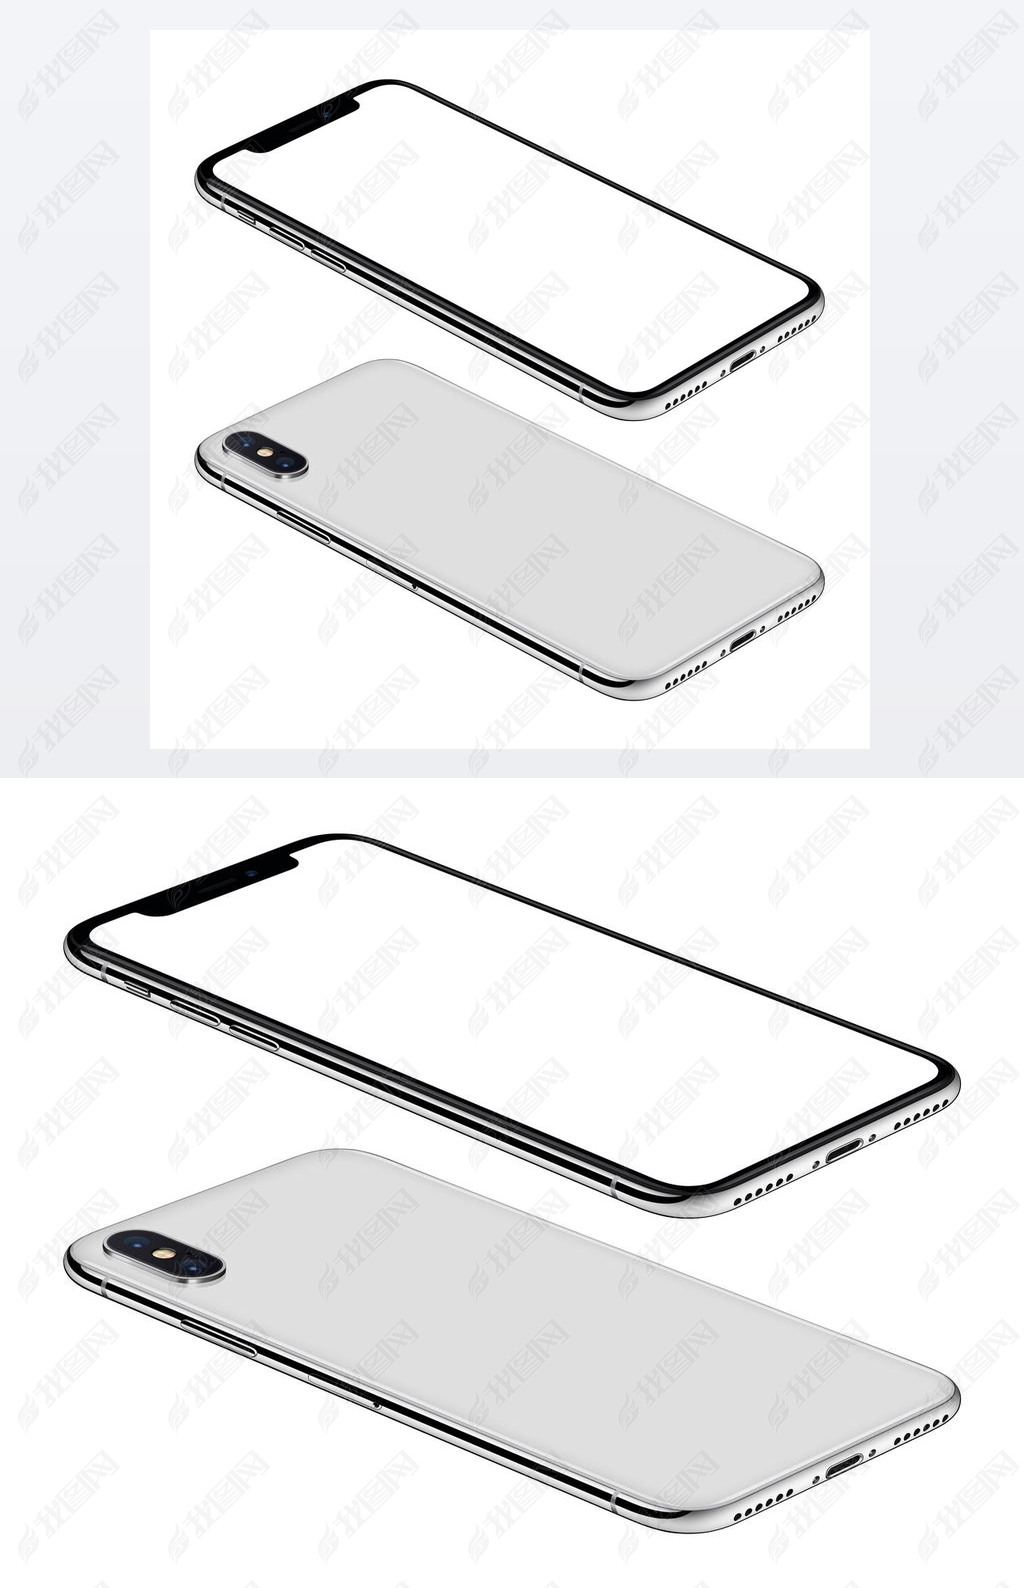 White artphone similar to iPhone X mockup front and back sides isometric view CCW rotated lies on 